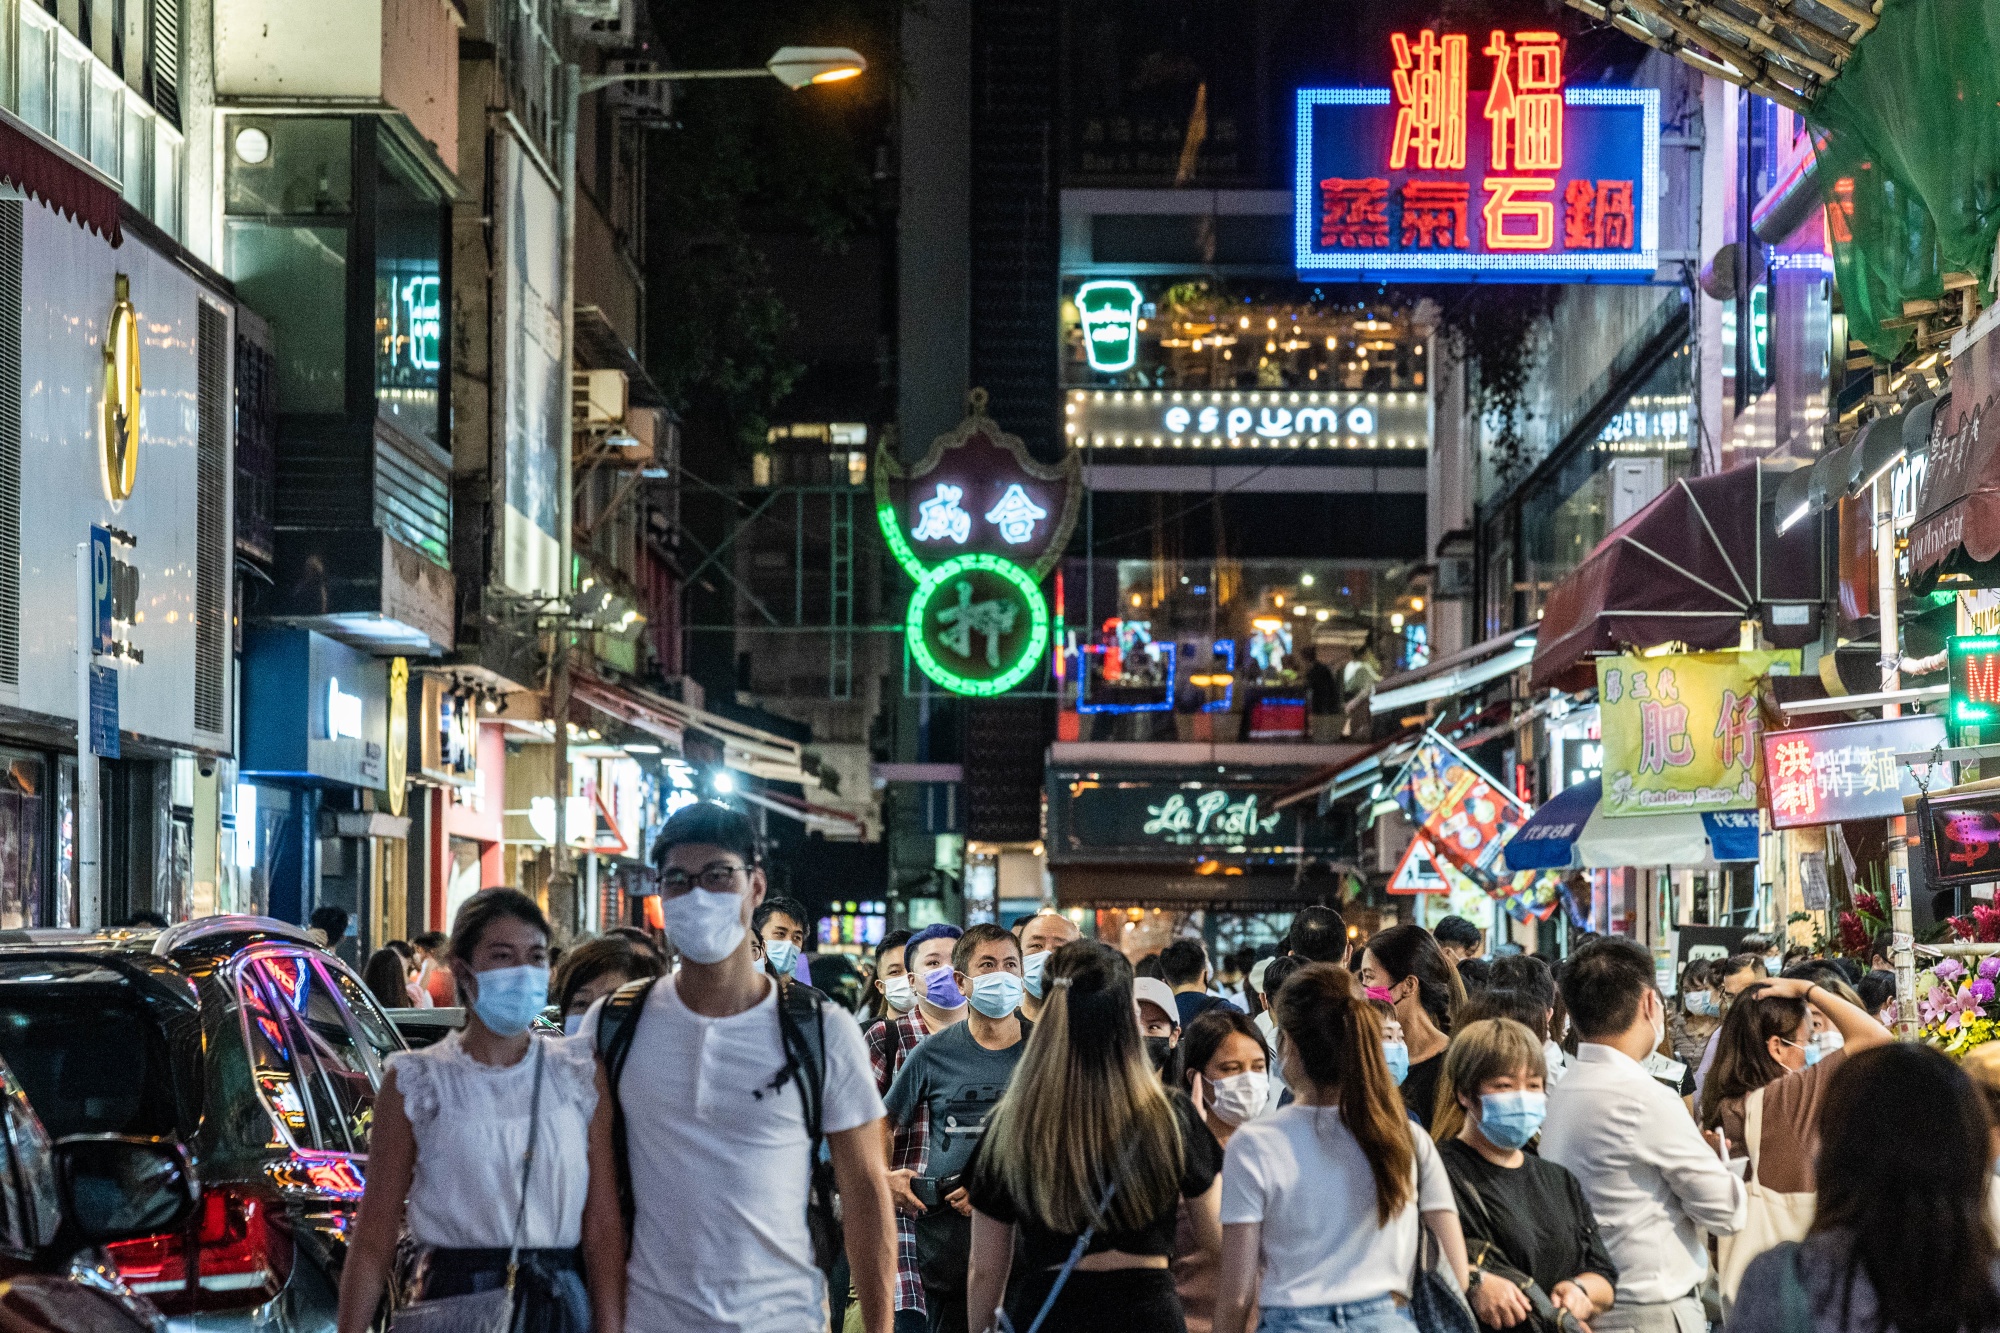 Restaurant and Retail Districts as Hong Kong Eases Covid Restrictions